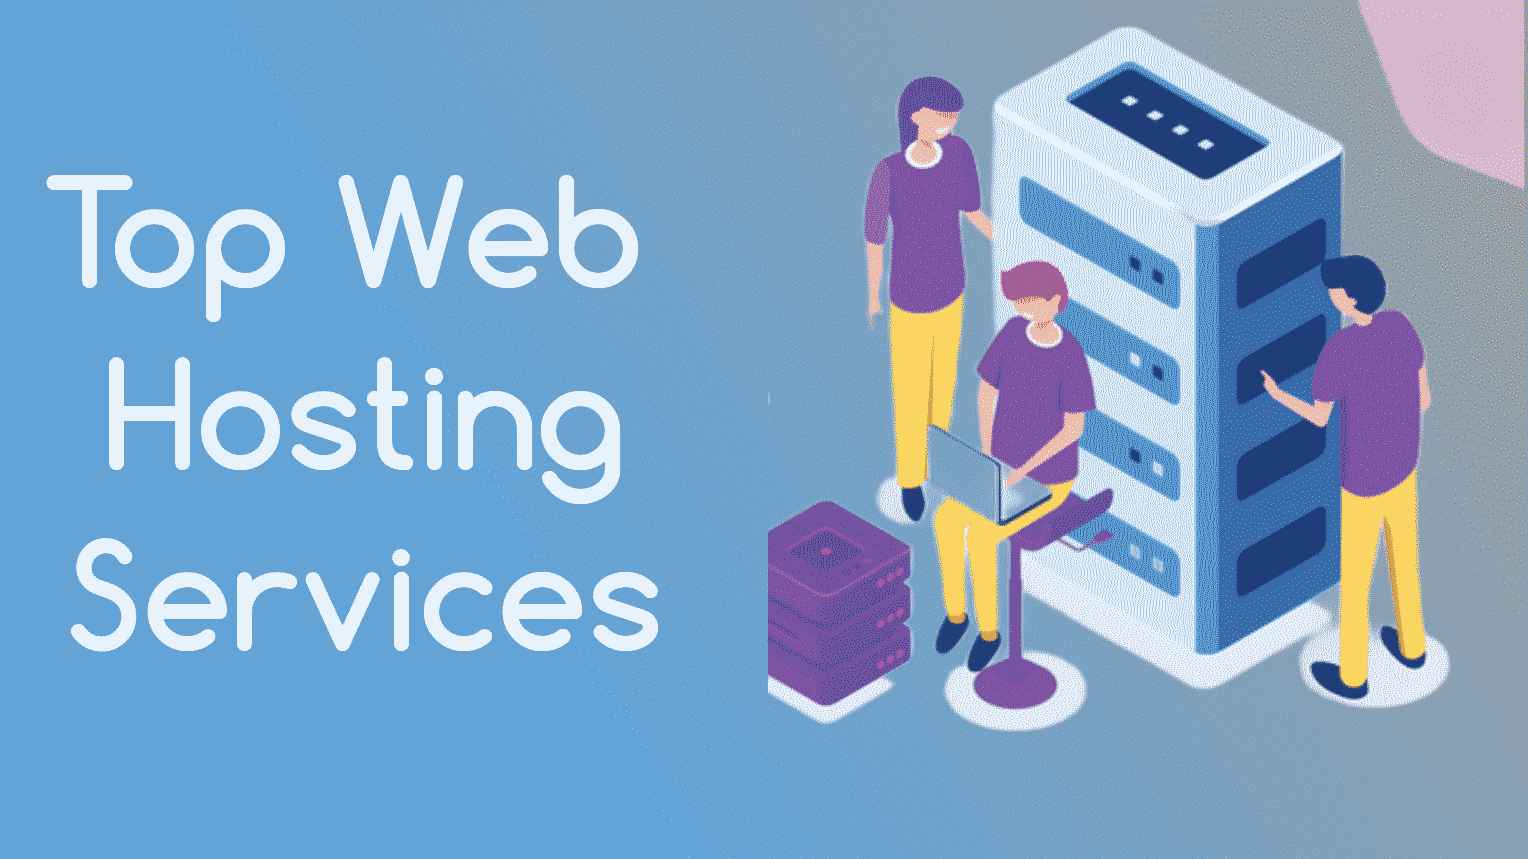 Top web hosting services